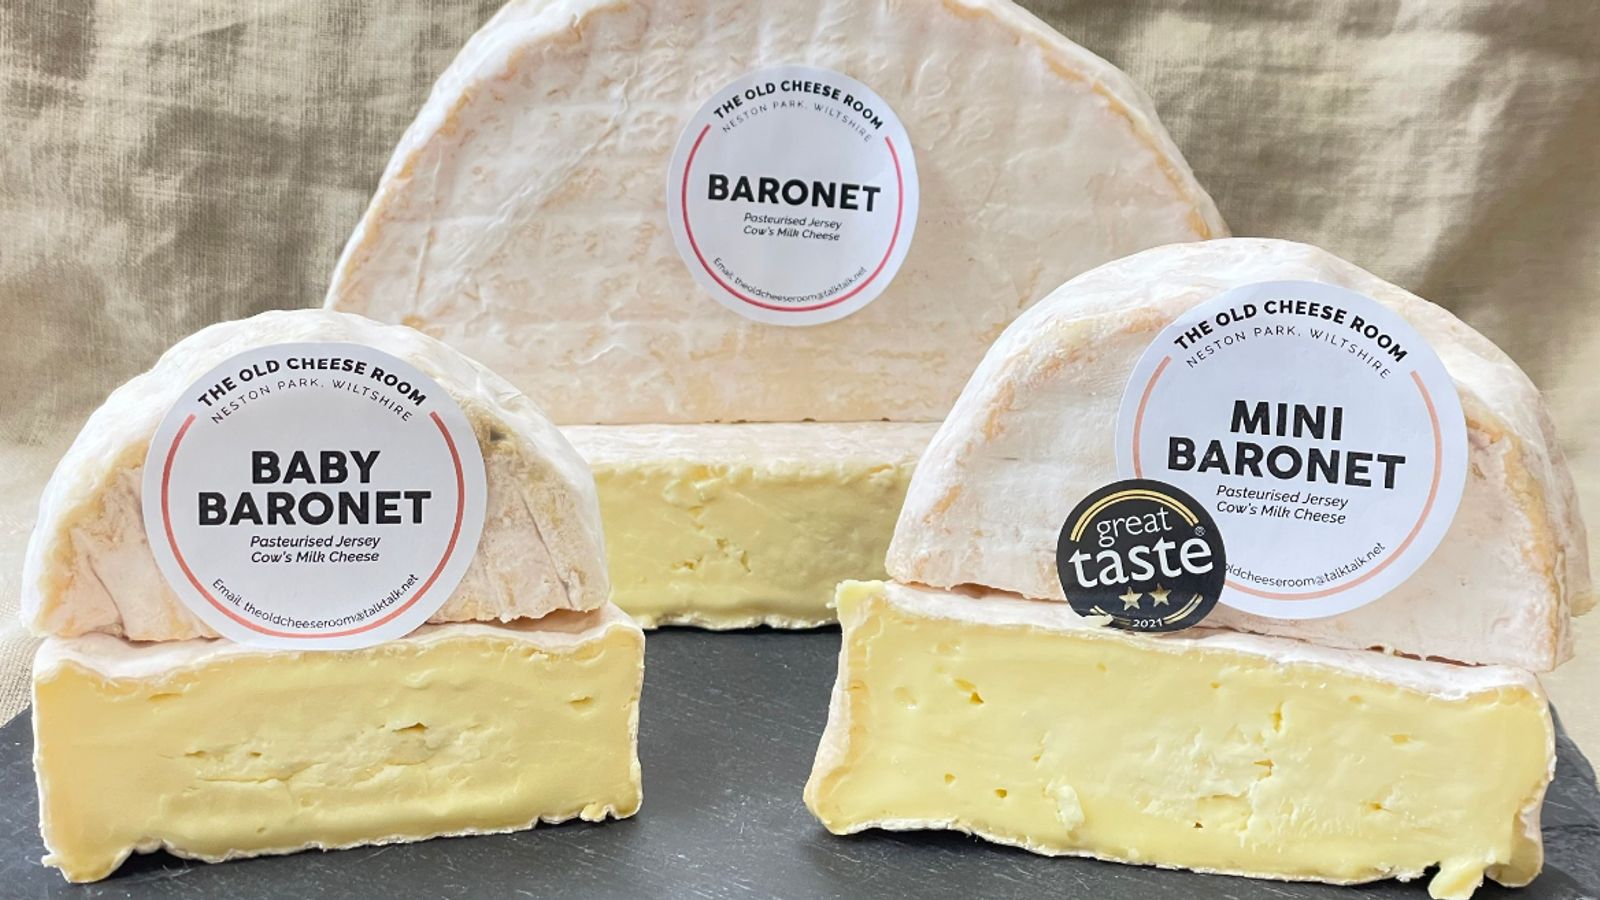 The Old Cheese Room issues recall of Baronet semi-soft cheese after listeria death 